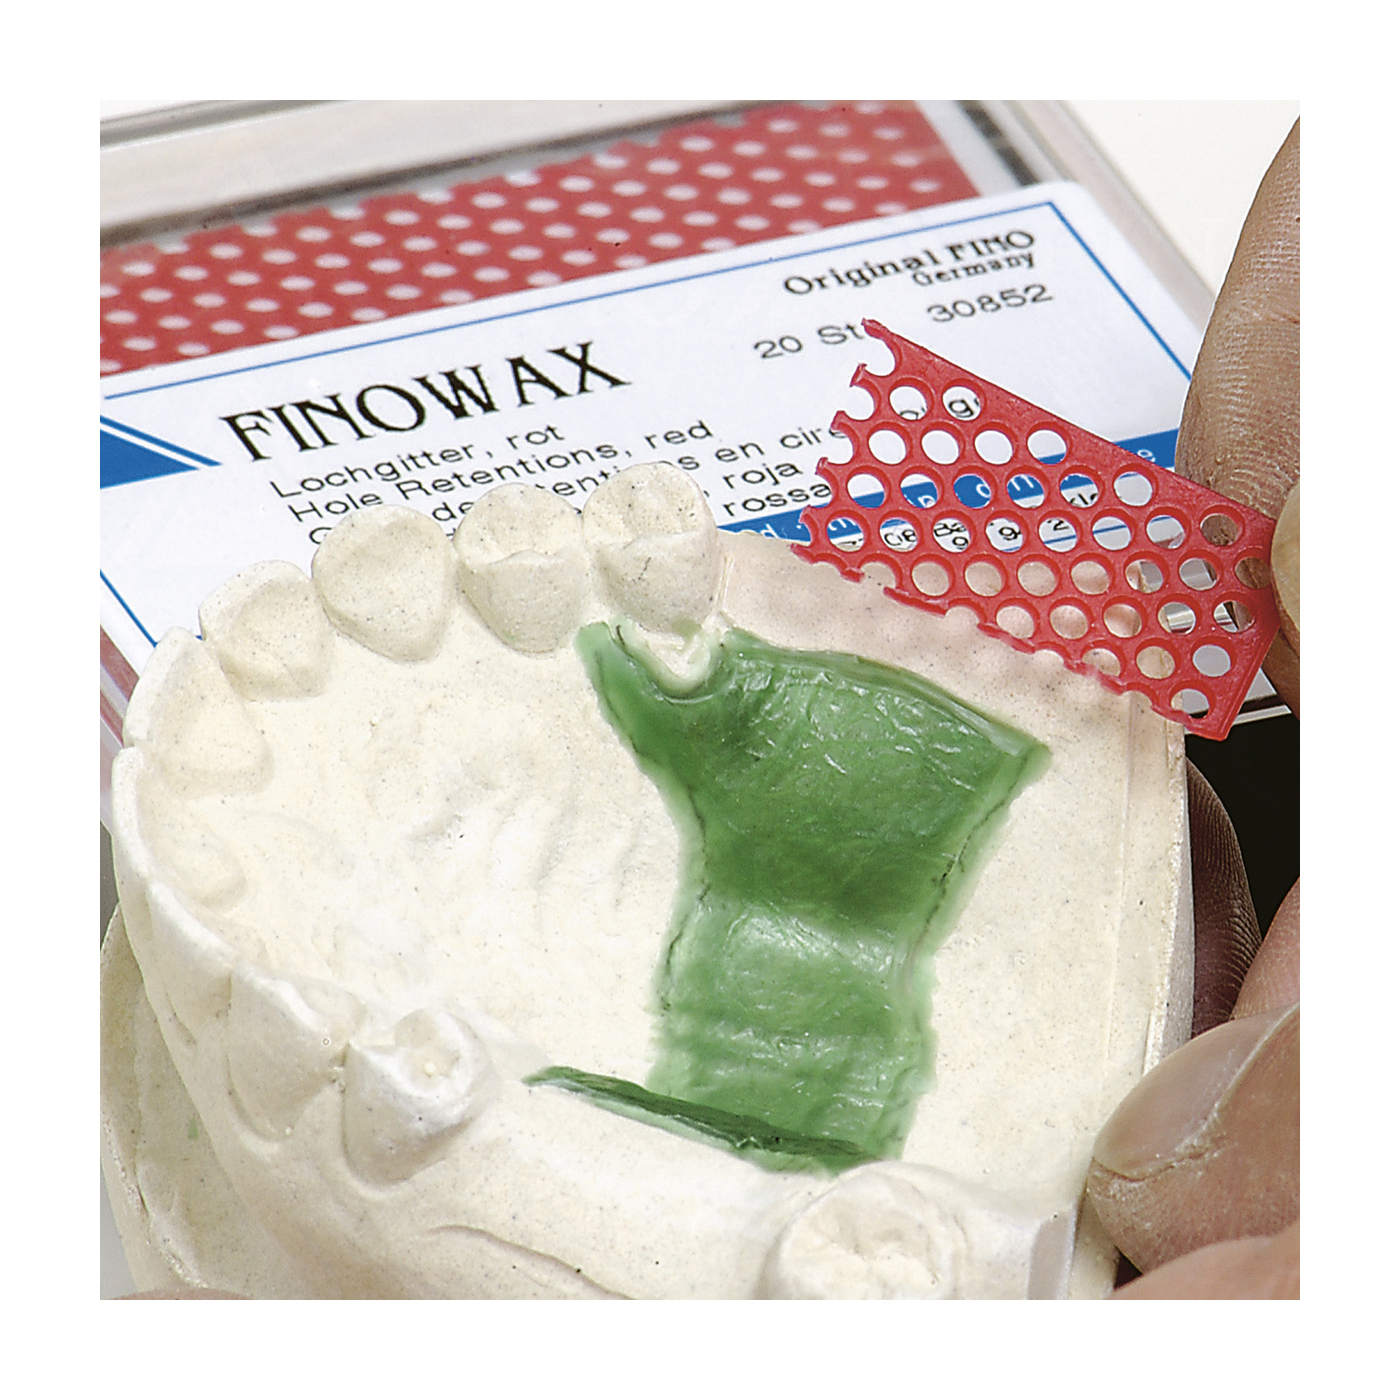 FINOWAX Preformed Wax Patterns, Punched Grids - 20 pieces